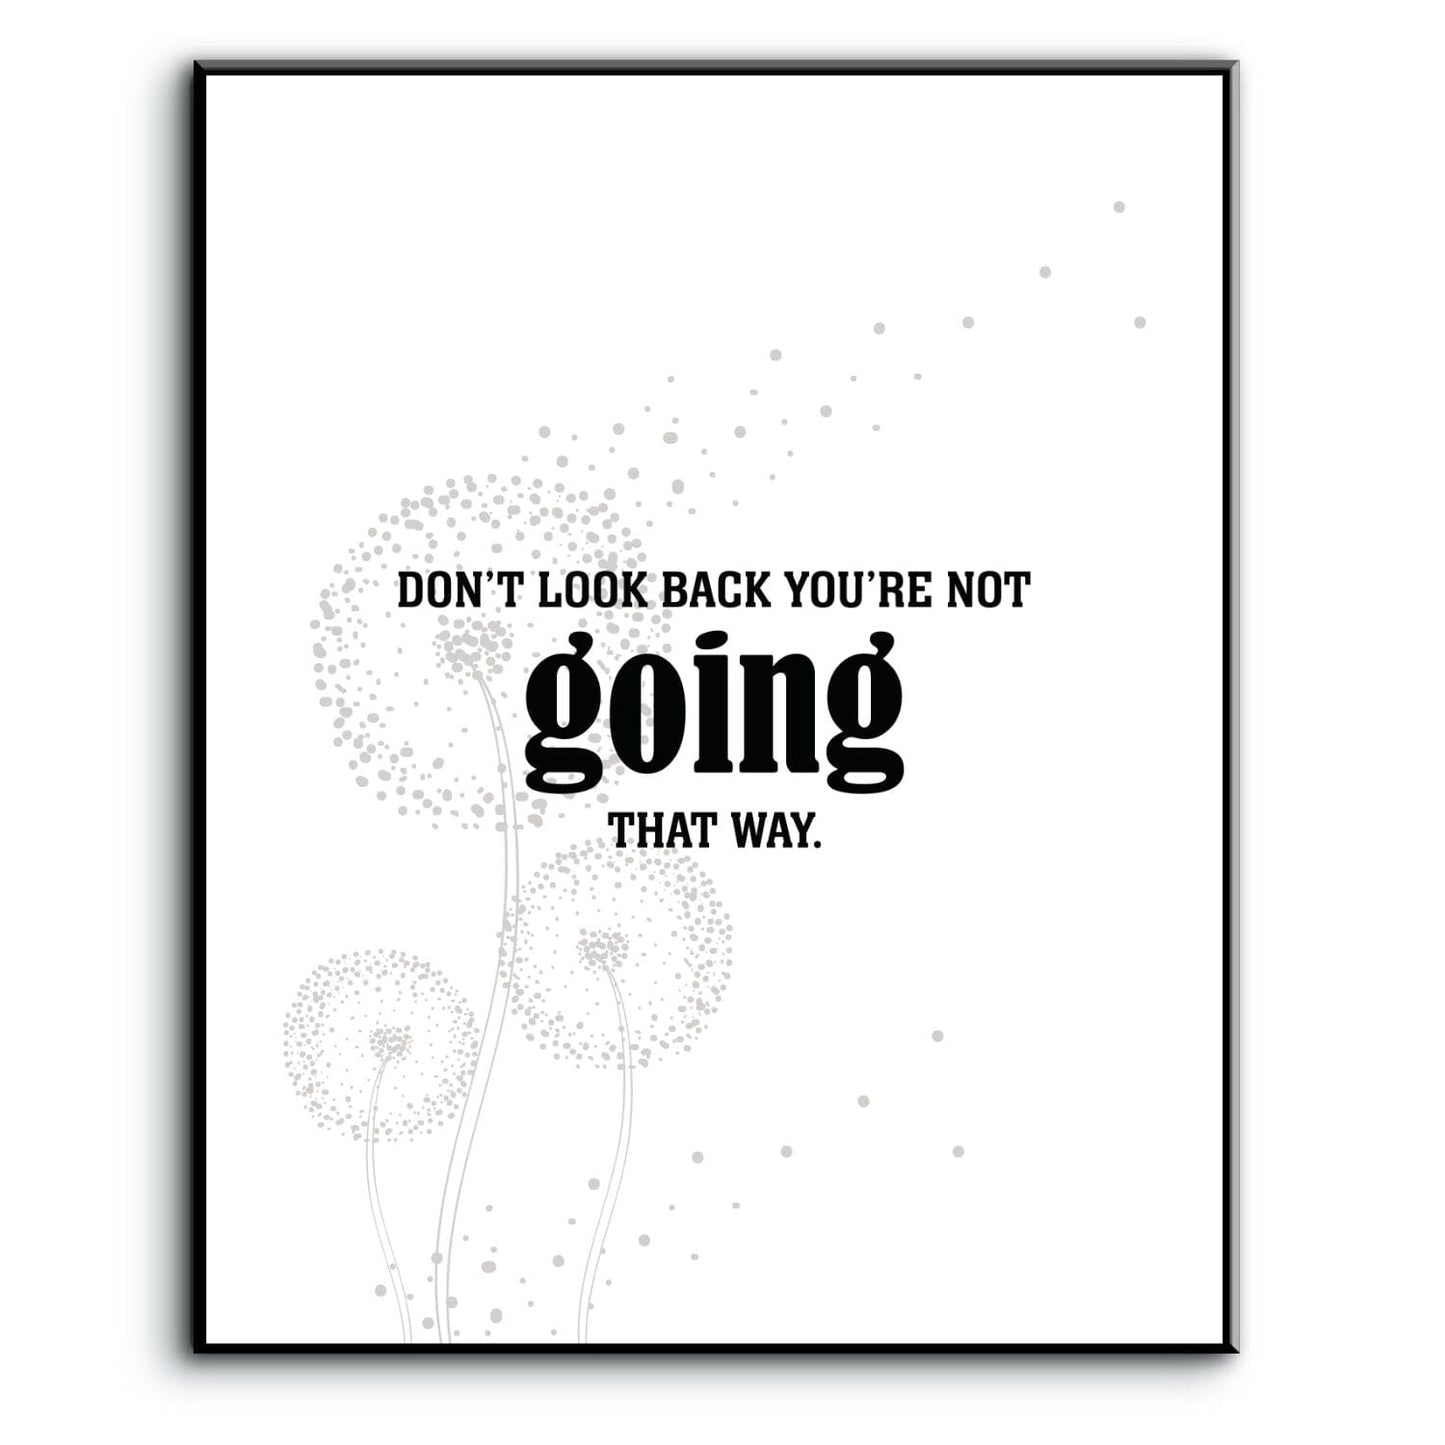 Don't Look Back You're Not Going that Way - Wise Witty Art Wise and Wiseass Quotes Song Lyrics Art 8x10 Plaque Mount 